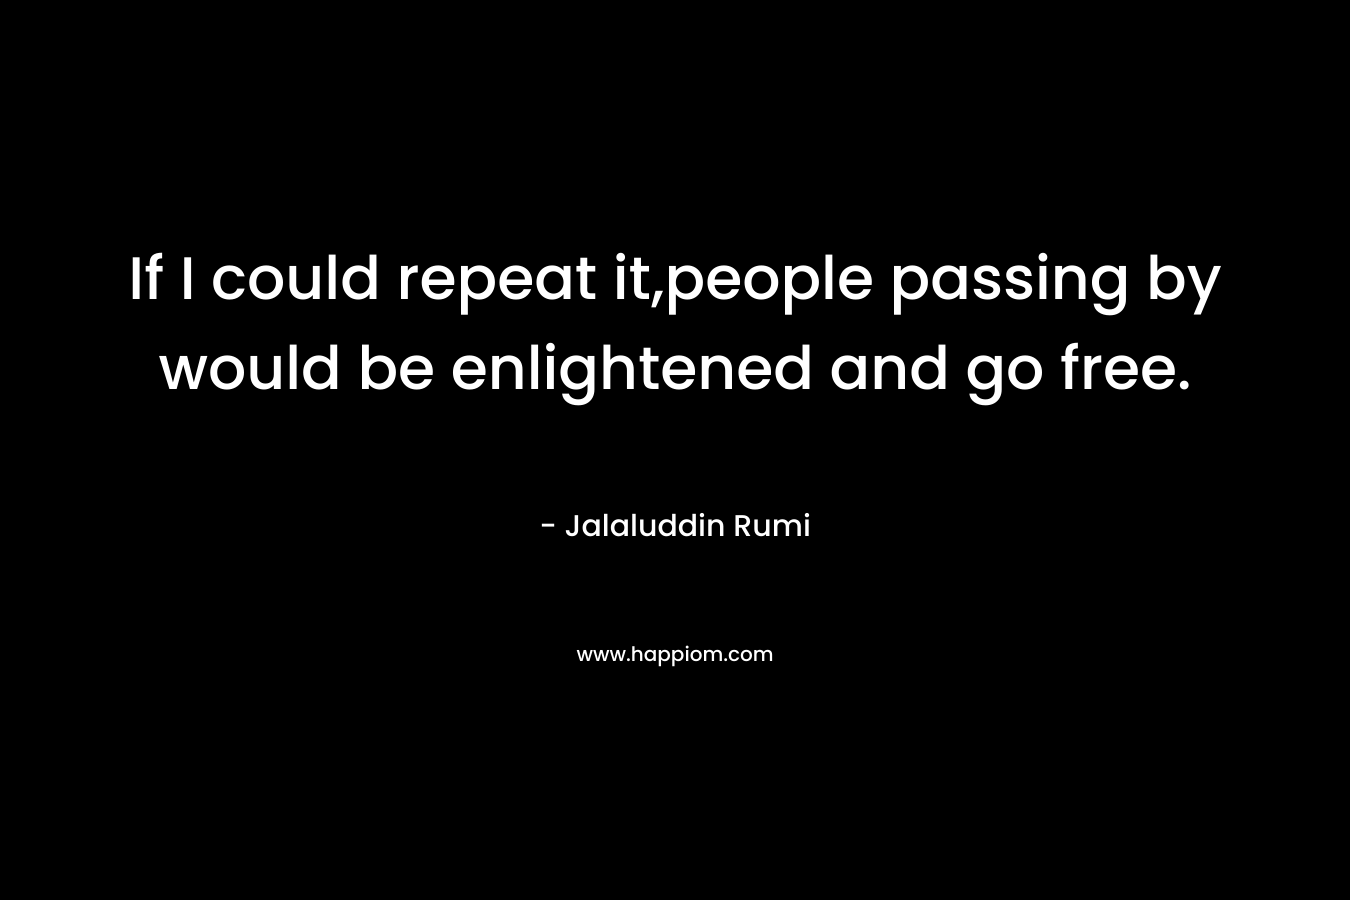 If I could repeat it,people passing by would be enlightened and go free. – Jalaluddin Rumi